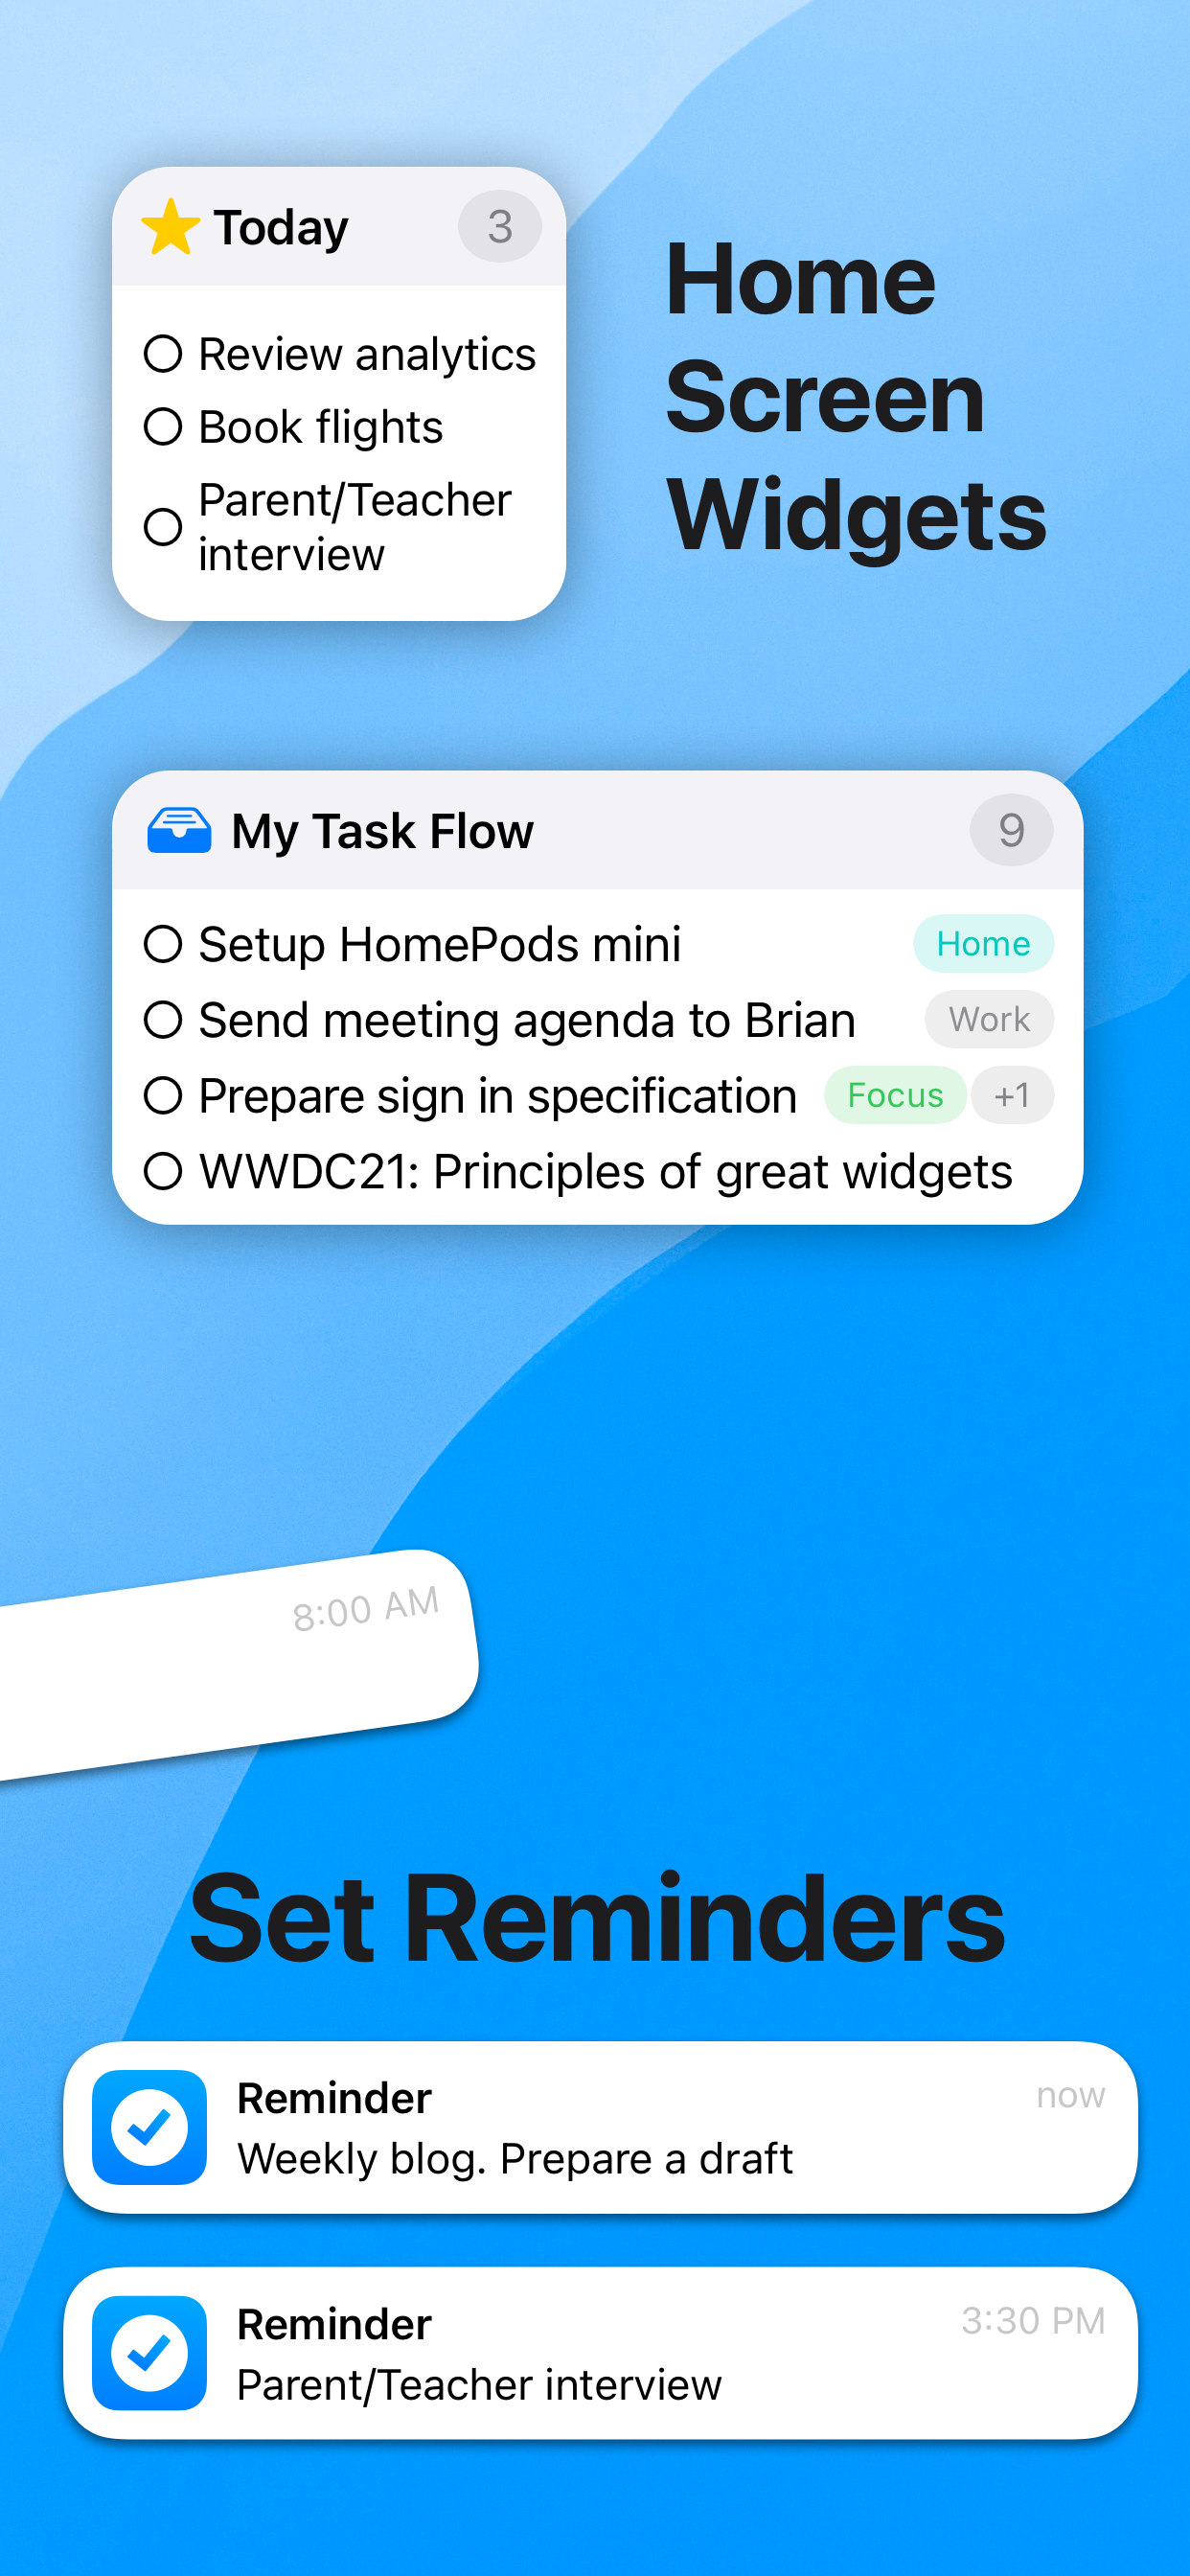 Home Screen Widgets and Reminders